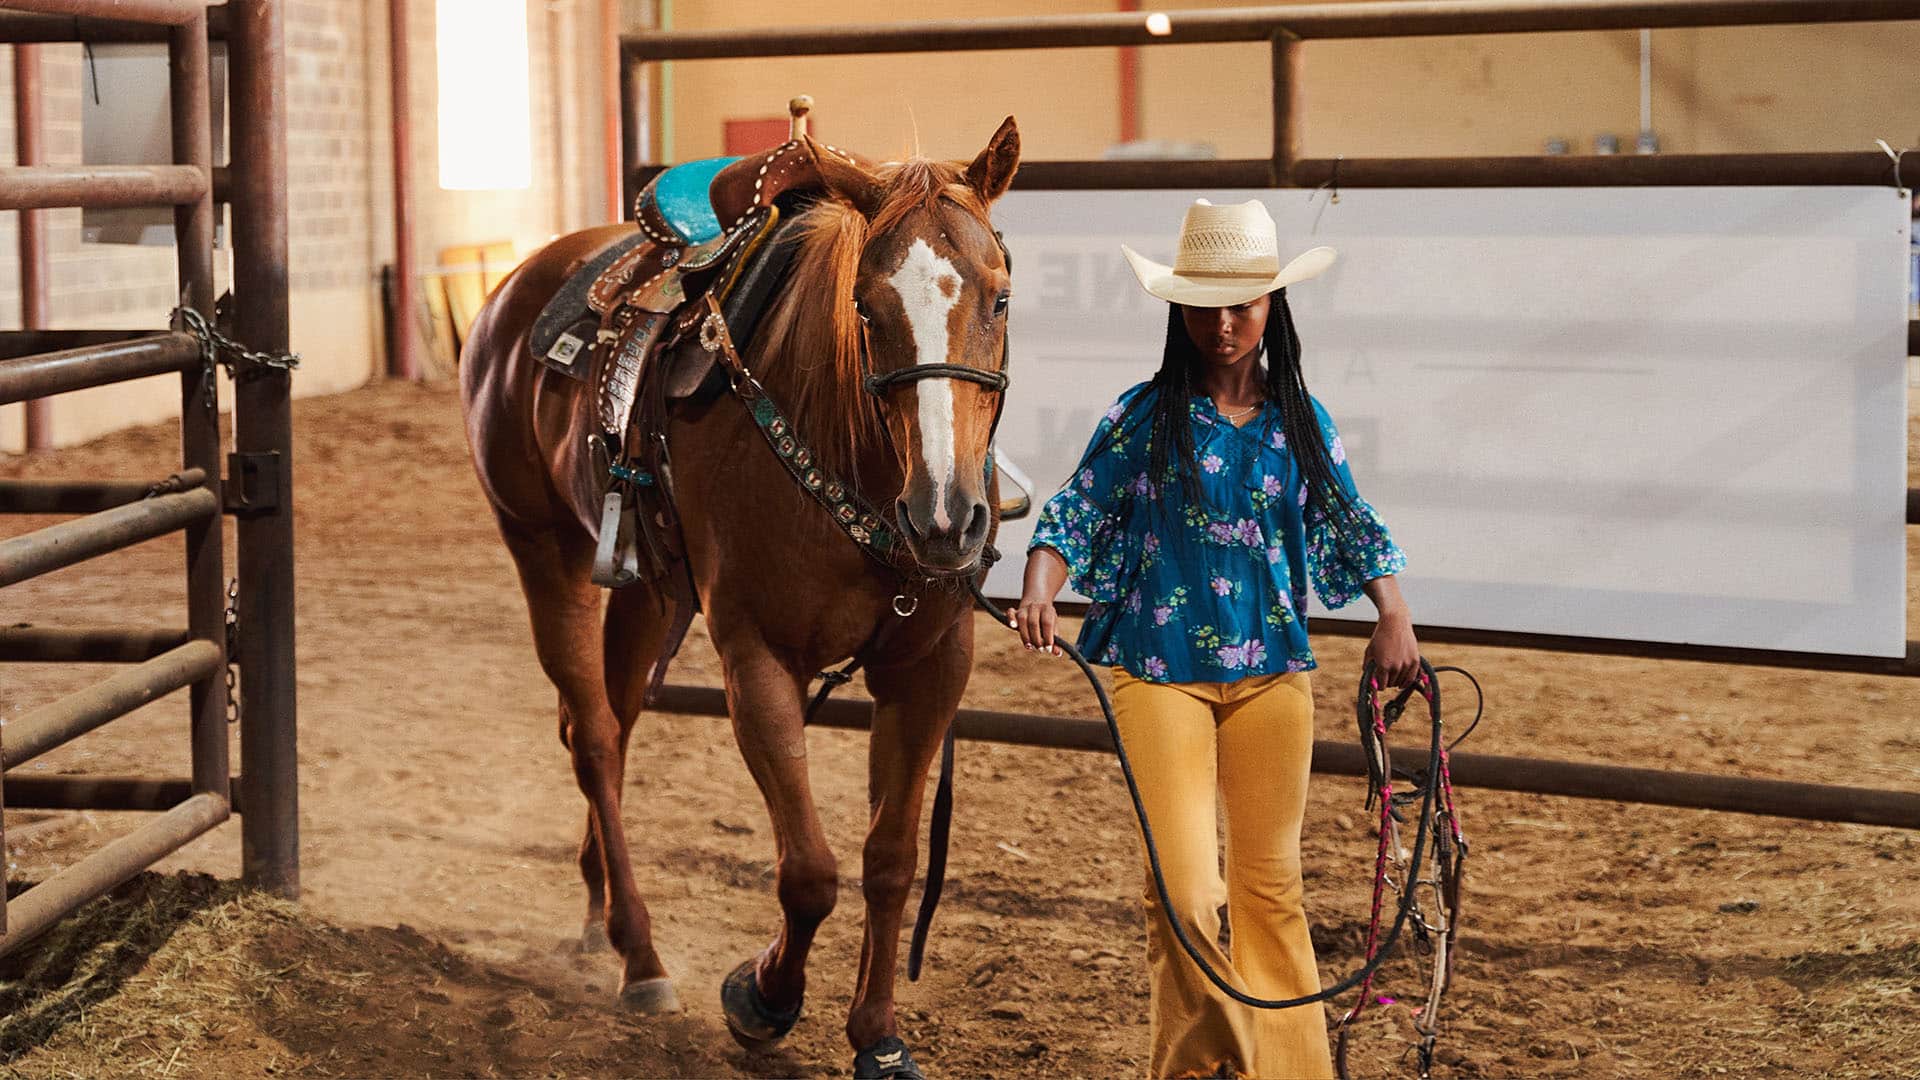 Meet the Cowgirls Introducing Black Rodeo Culture Across the Country